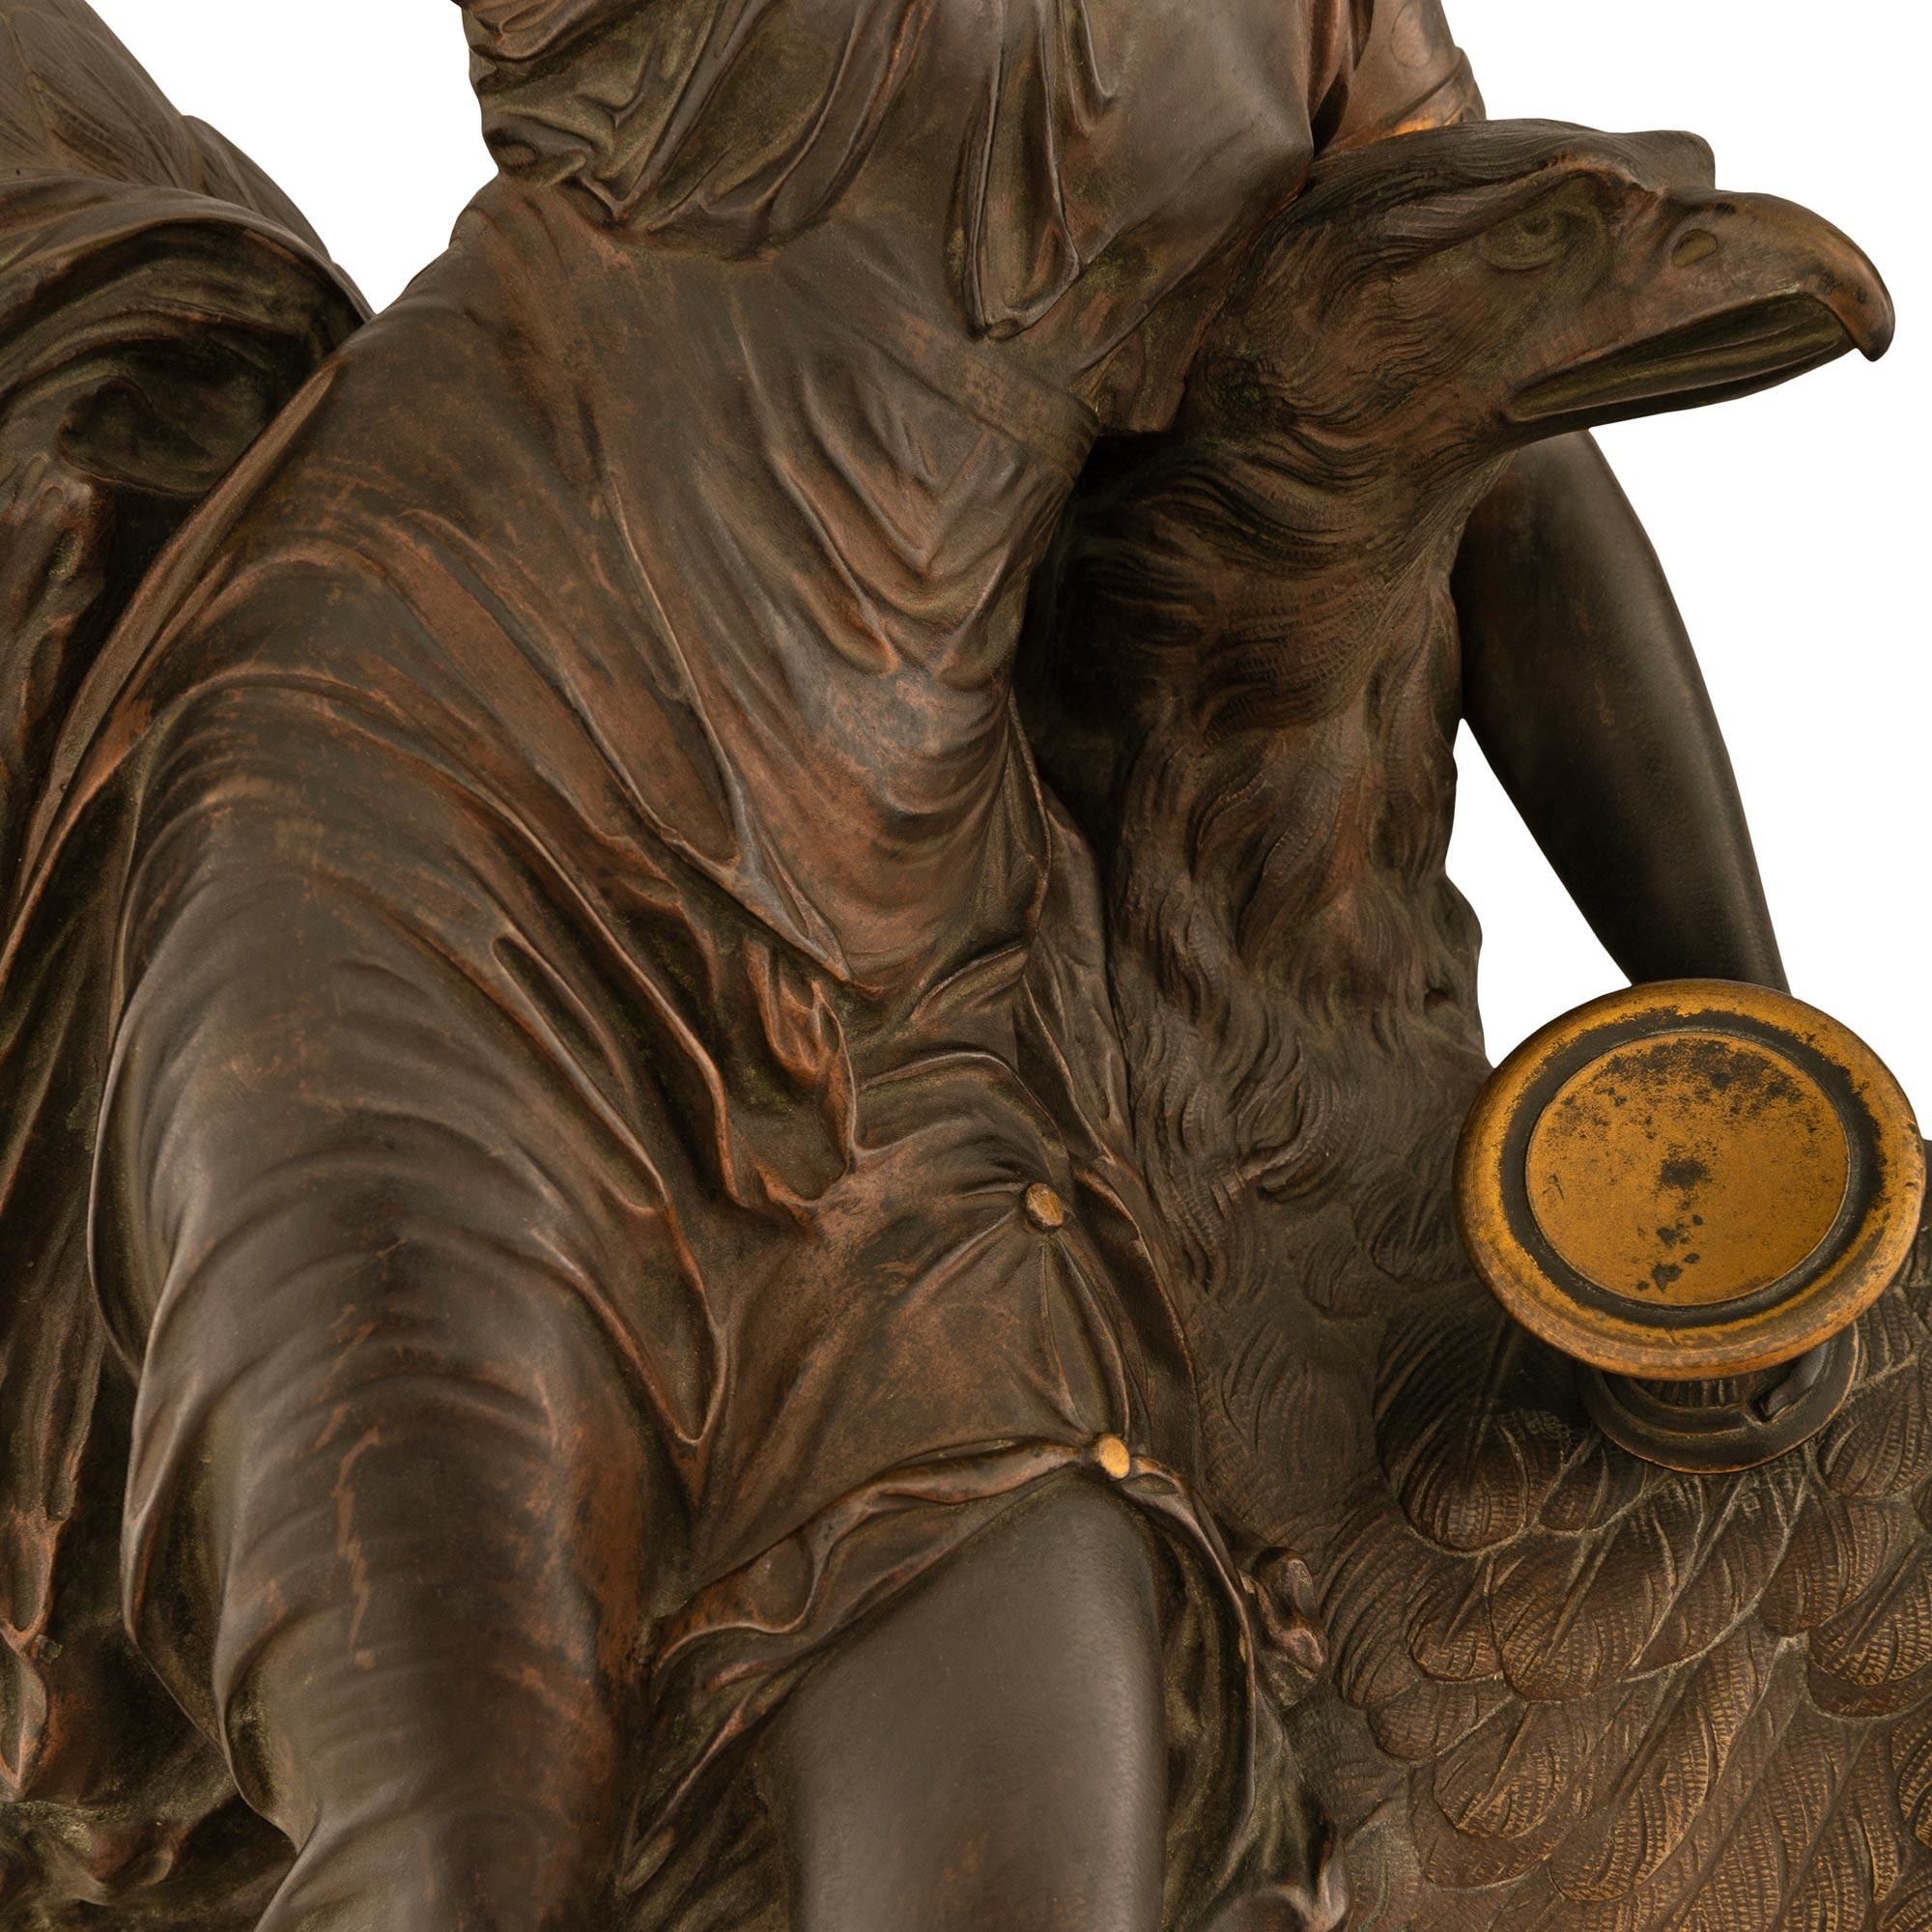 A stunning French 19th century patinated bronze statue of Hebe and the Eagle of Jupiter, signed by Louis Charles Hippolyte Buhot. The statue is raised by a circular black Belium marble base with a finely chased ormolu band depicting youthful cherubs